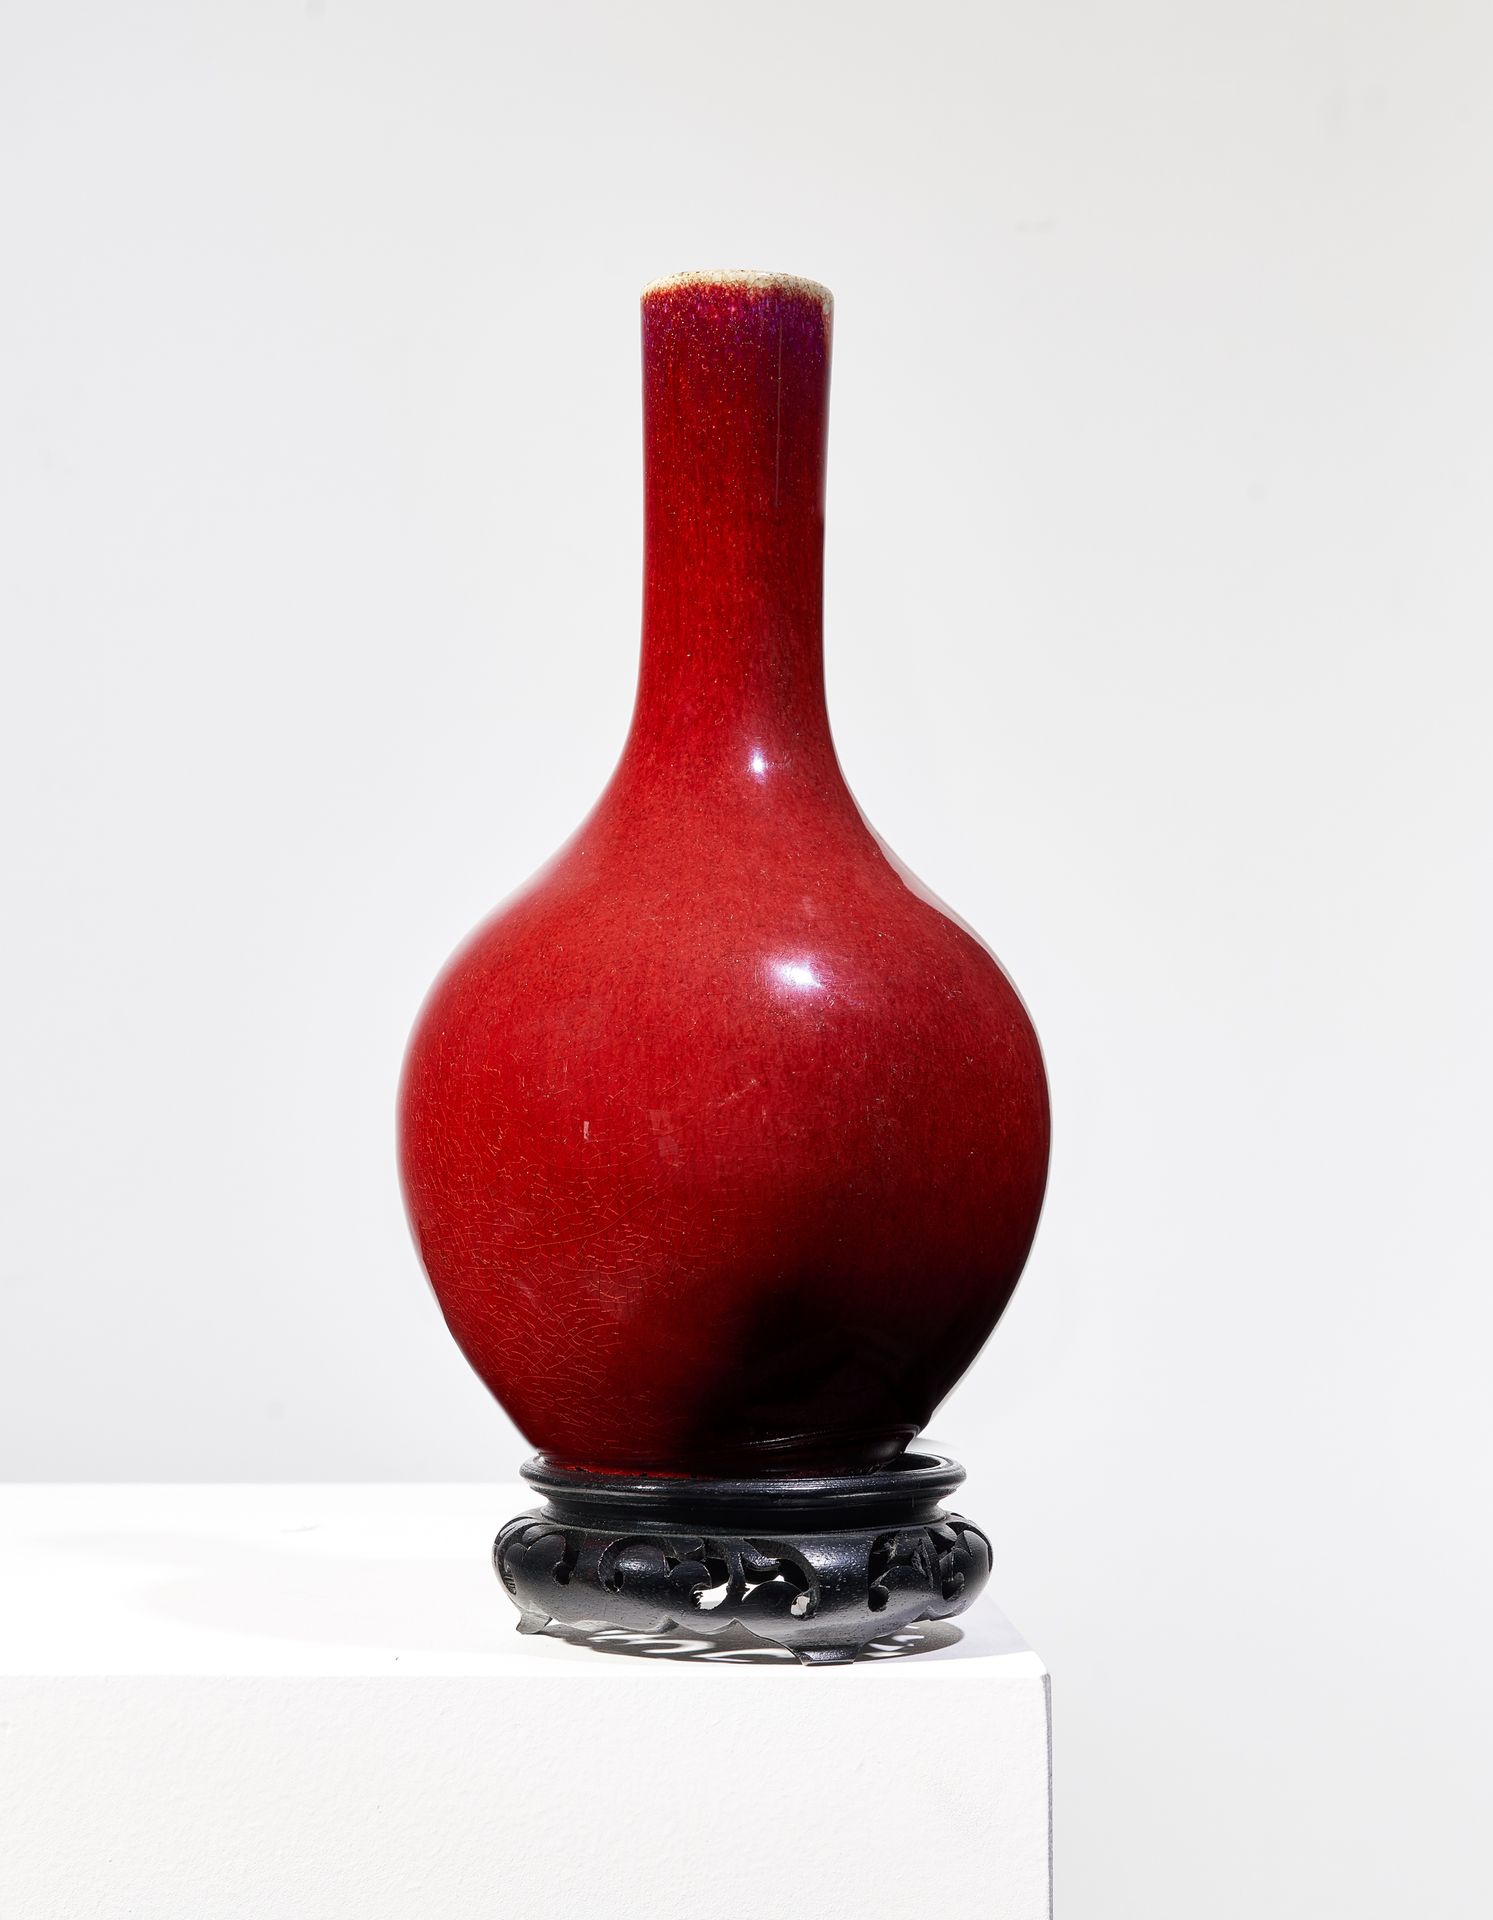 Null A FLAMBE-GLAZE BOTTLE VASE

Late Qing dynasty (1644-1911) 

Of deep red col&hellip;